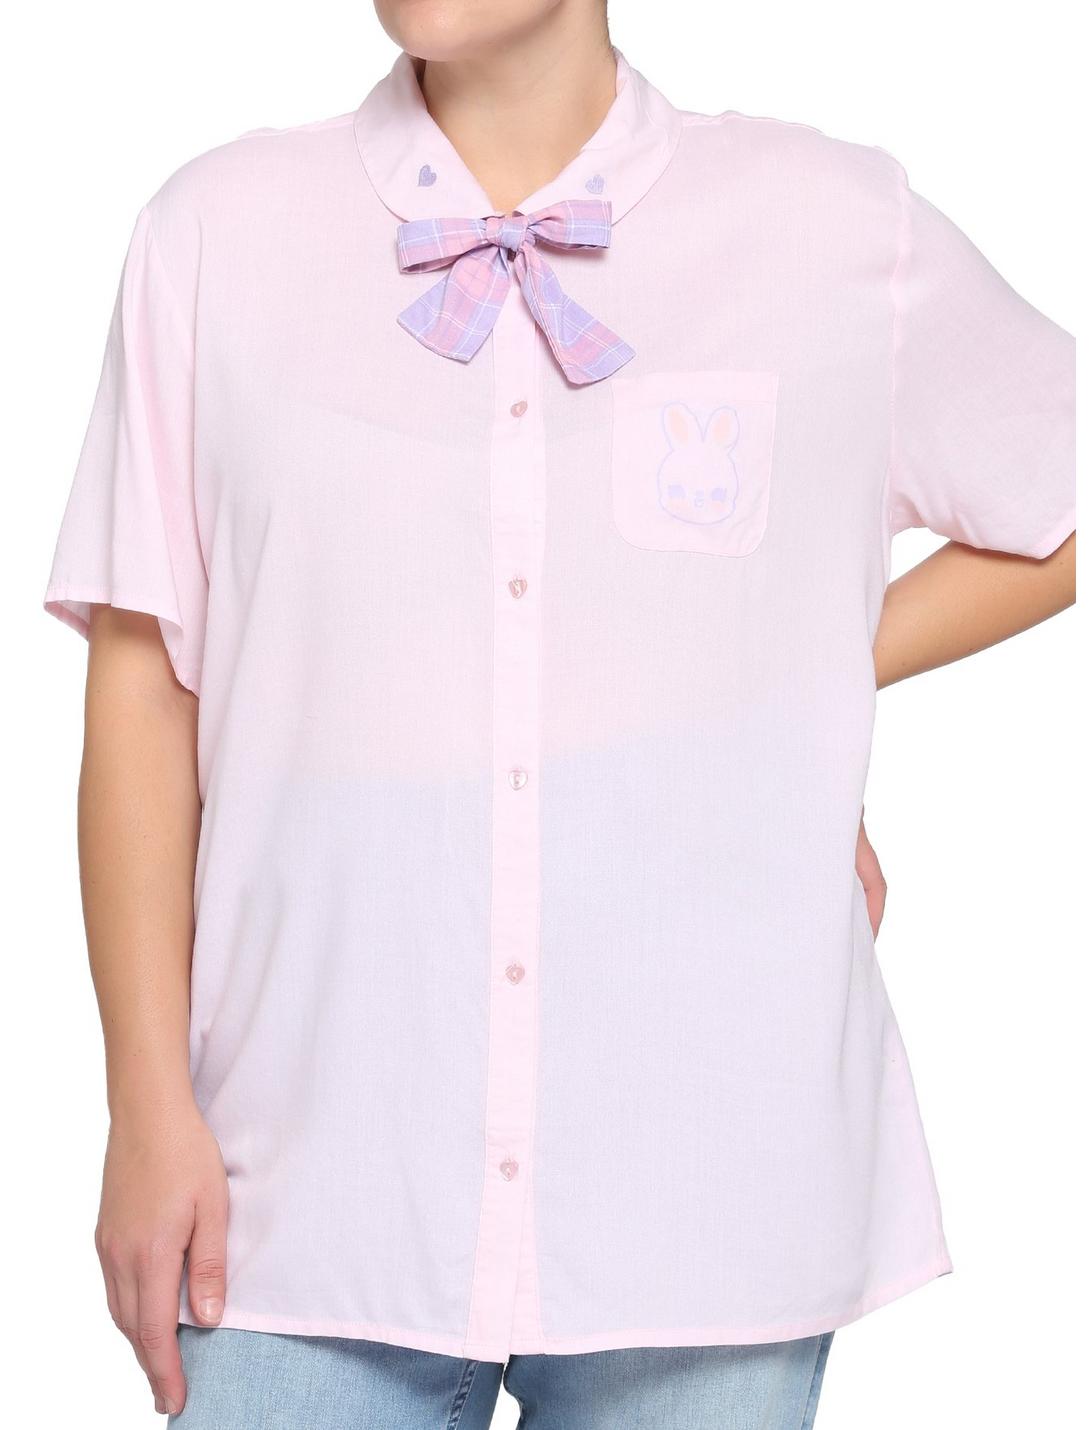 Kawaii Pastel Bunny Bow Girls Woven Button-Up Plus Size, MULTI, hi-res